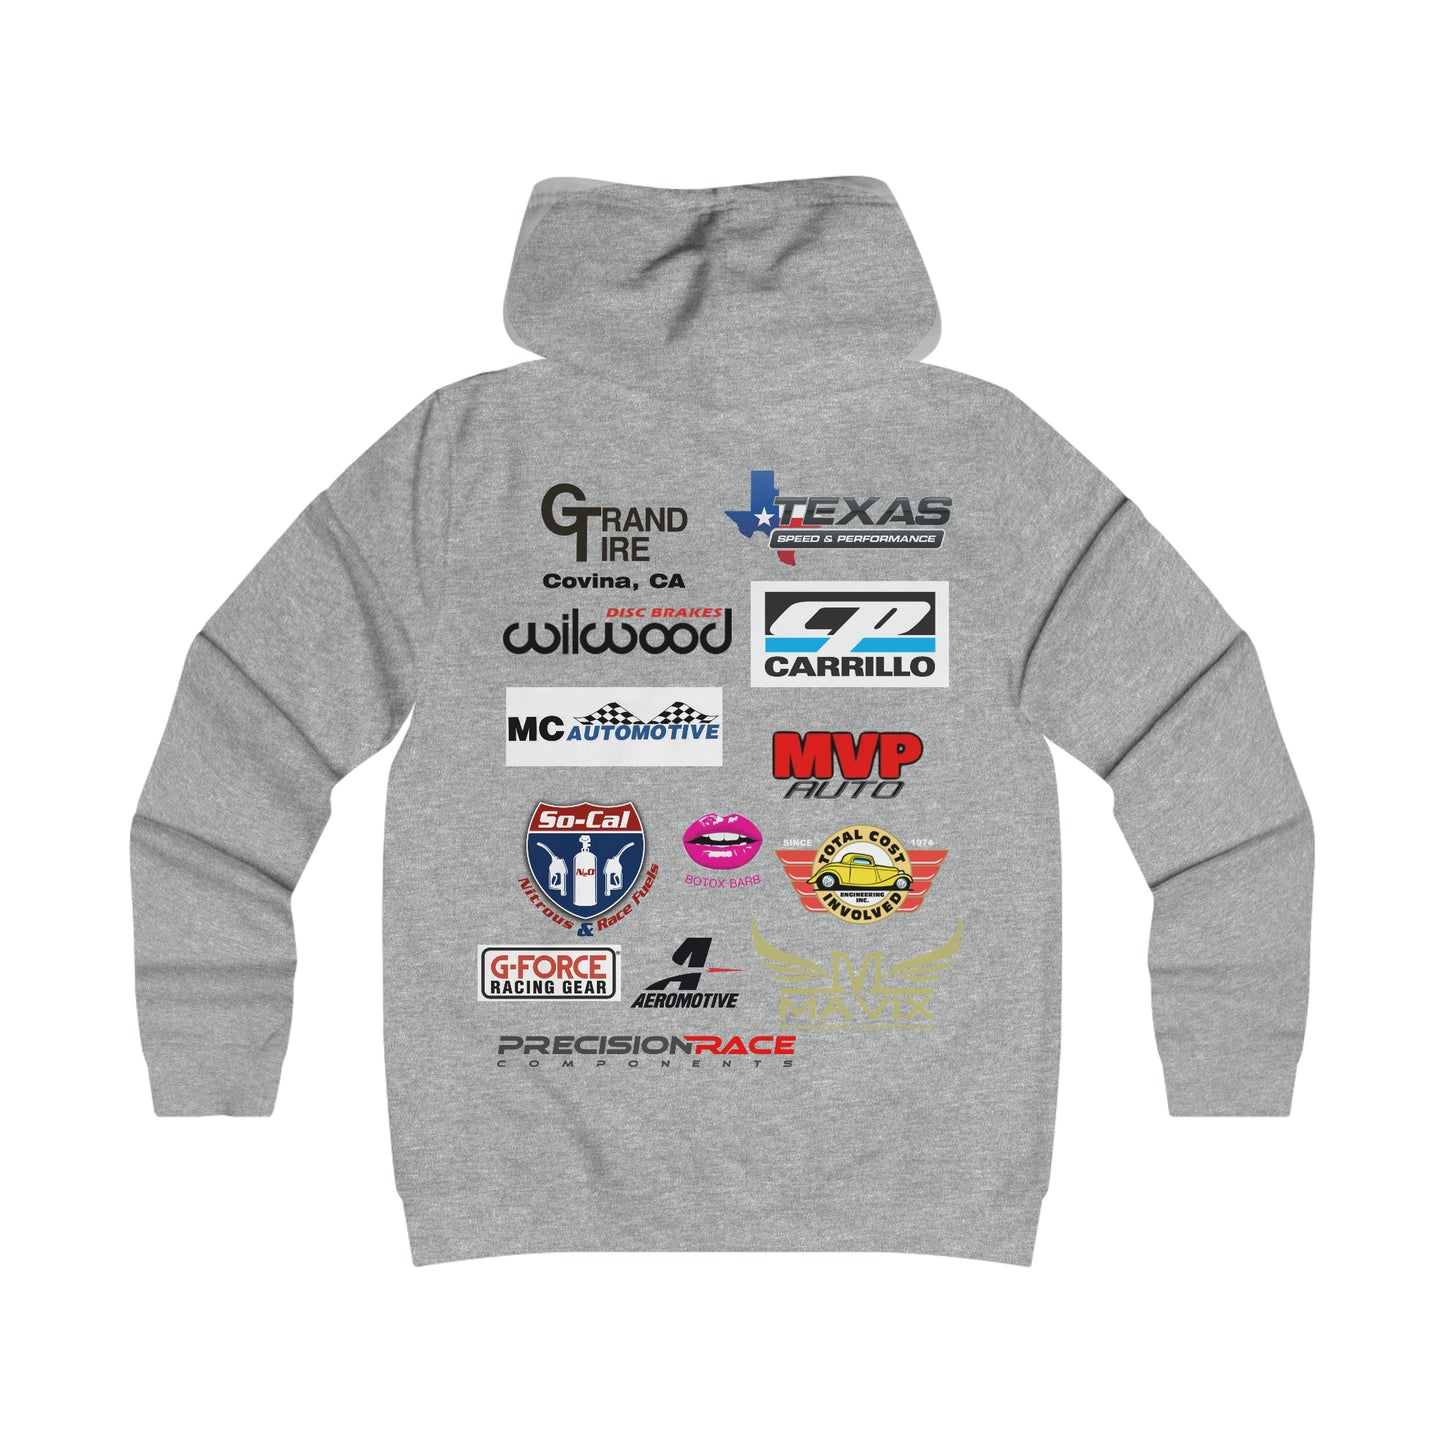 FT FAB Hoodie with sponsors 2023